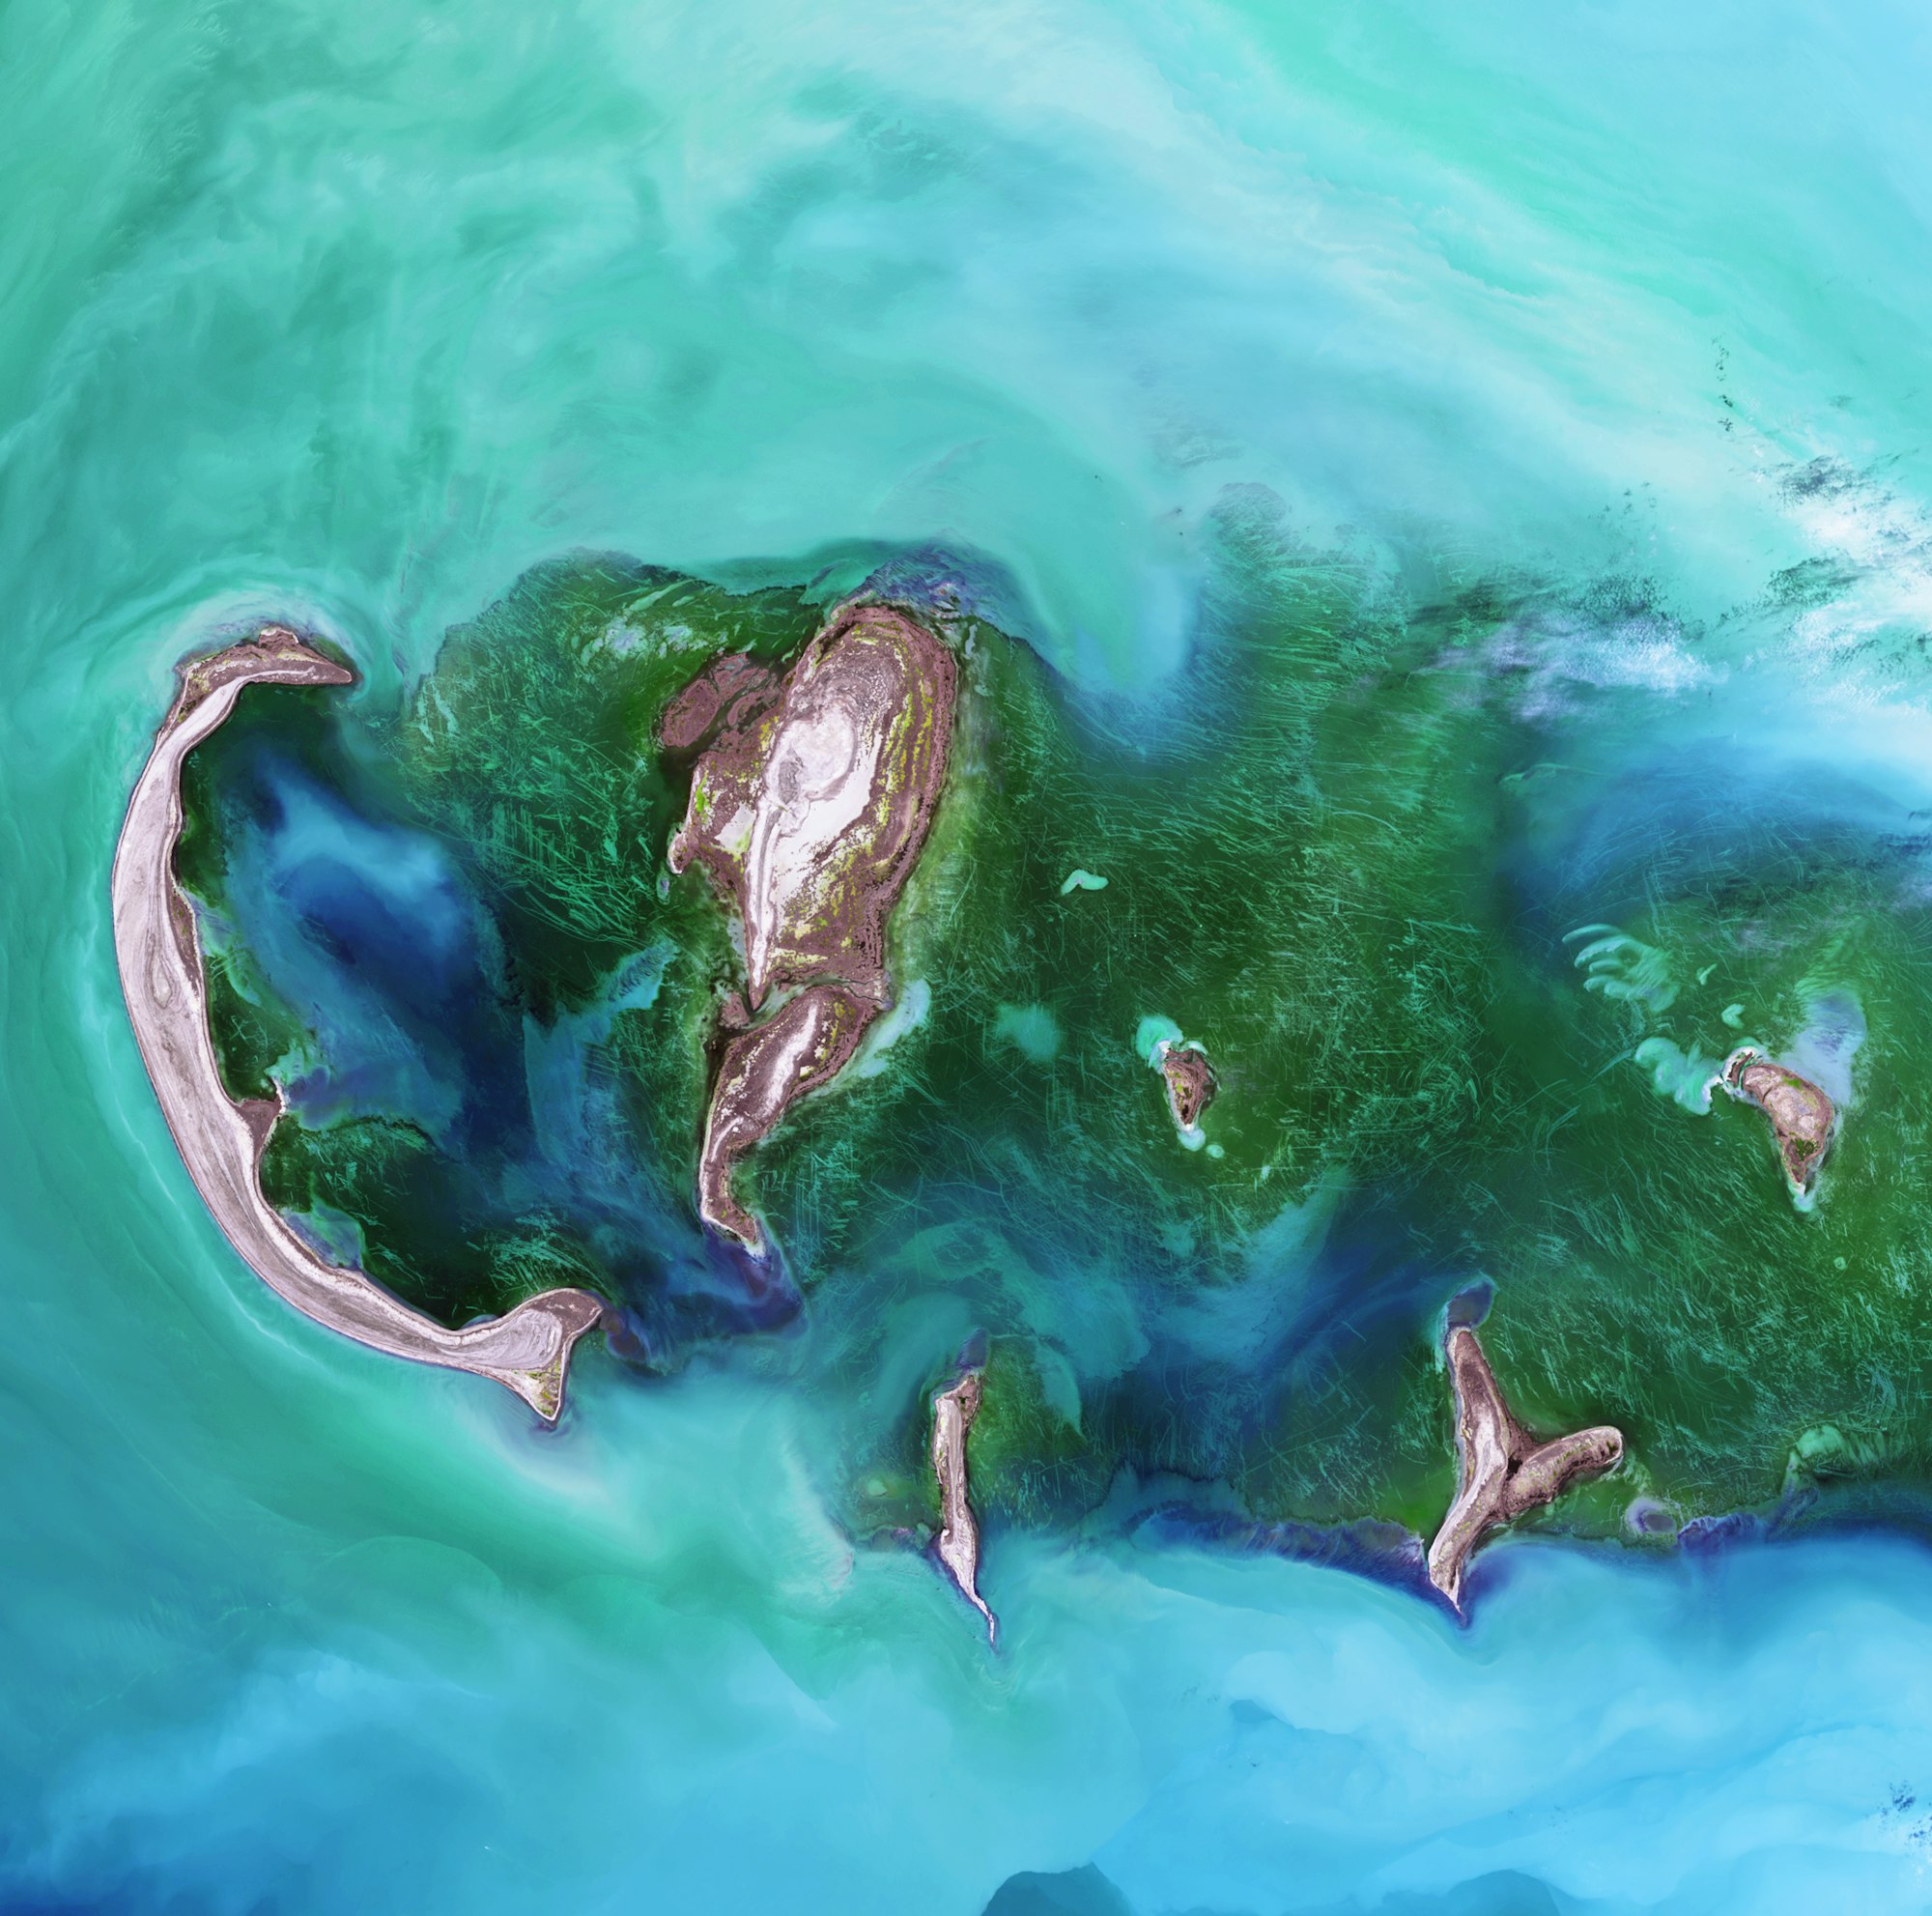 In shallow waters surrounding the Tyuleniy Archipelago in the Caspian Sea, chunks of ice were the artists. The 3-meter-deep water makes the dark green vegetation on the sea bottom visible. The lines scratched in that vegetation were caused by ice chunks, pushed upward and downward by wind and currents, scouring the sea floor.